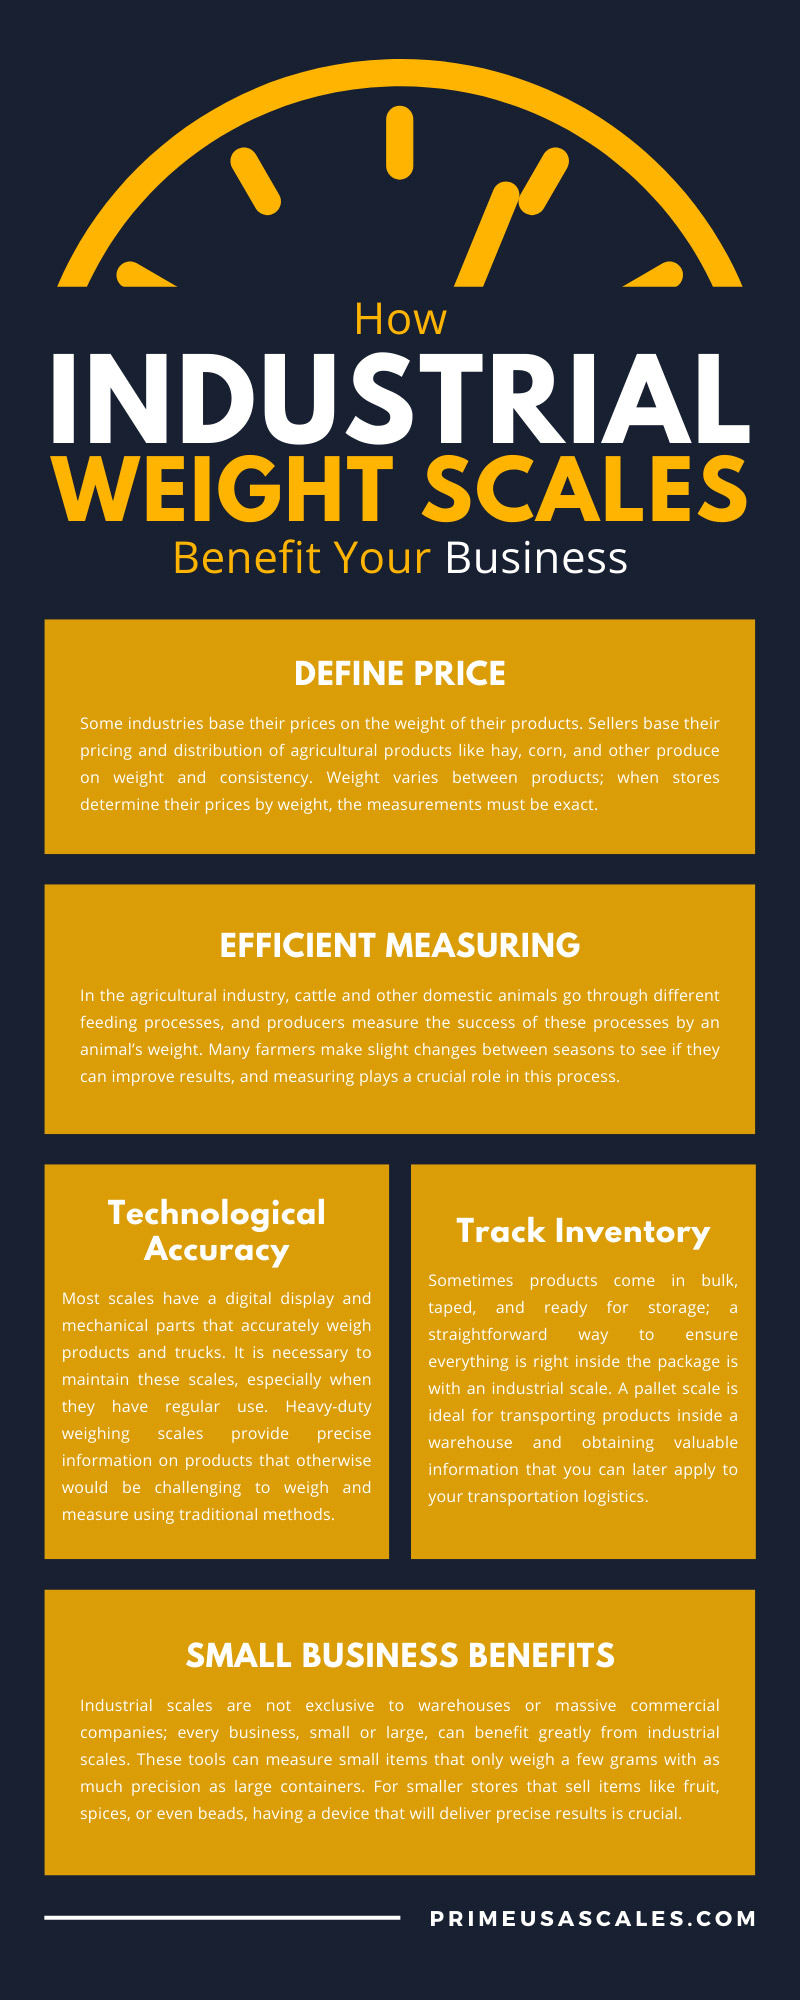 How Industrial Weight Scales Benefit Your Business